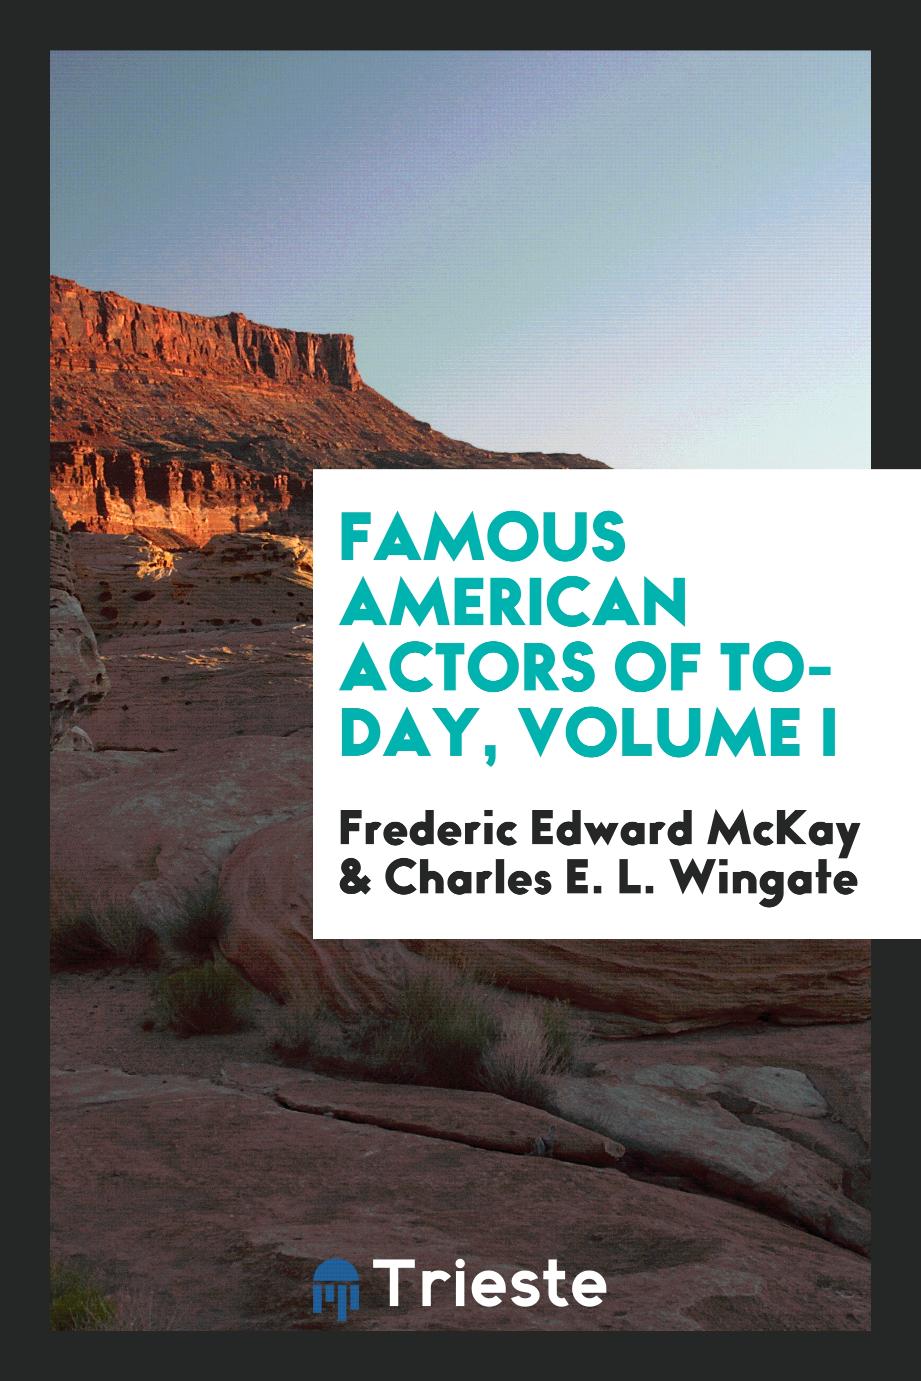 Famous American actors of to-day, Volume I